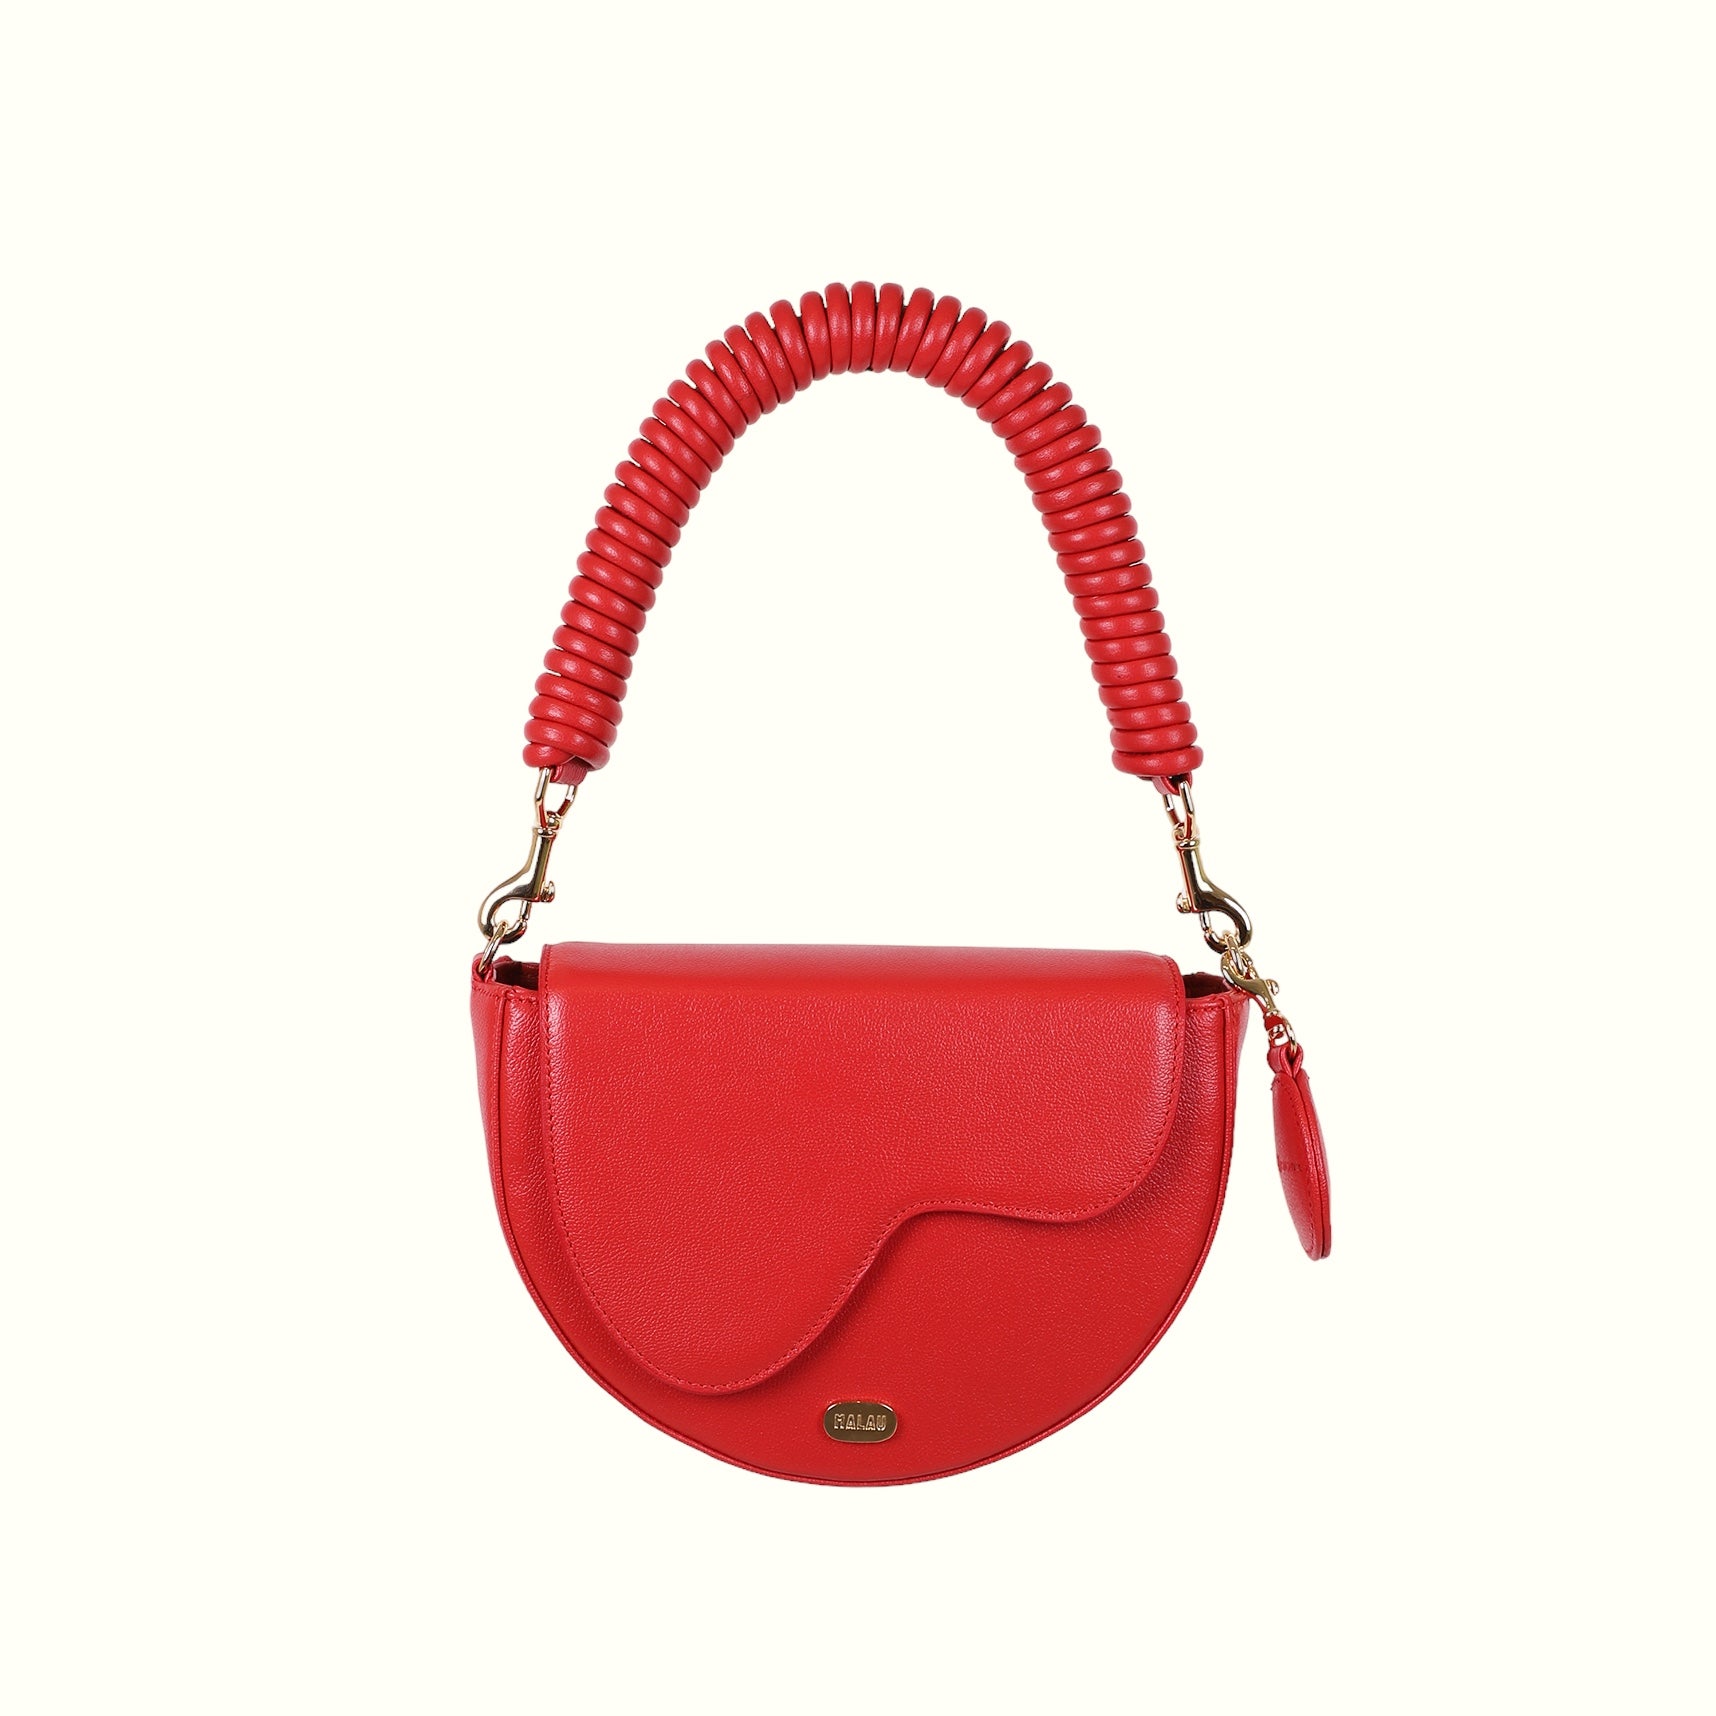 Buy Bolly Trend Girls Red Sling Bags at Amazon.in